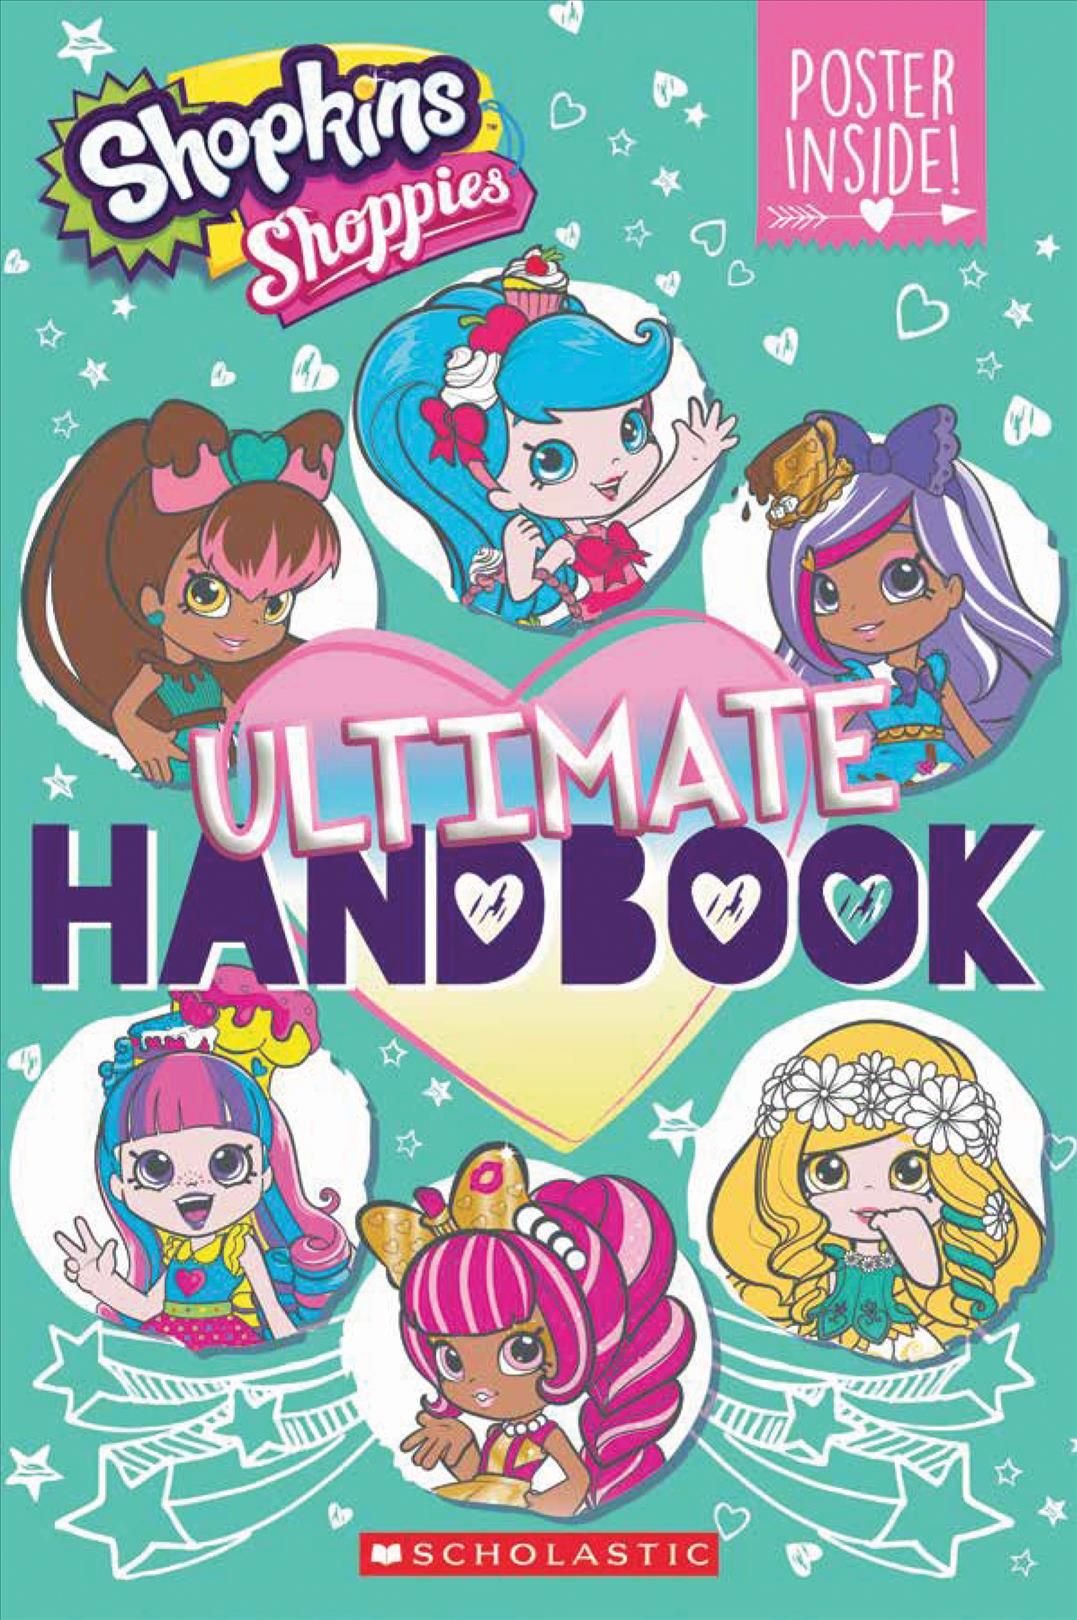 Buy Shopkins Shoppies: Ultimate Handbook + Poster by Jenne Simon With Free  Delivery